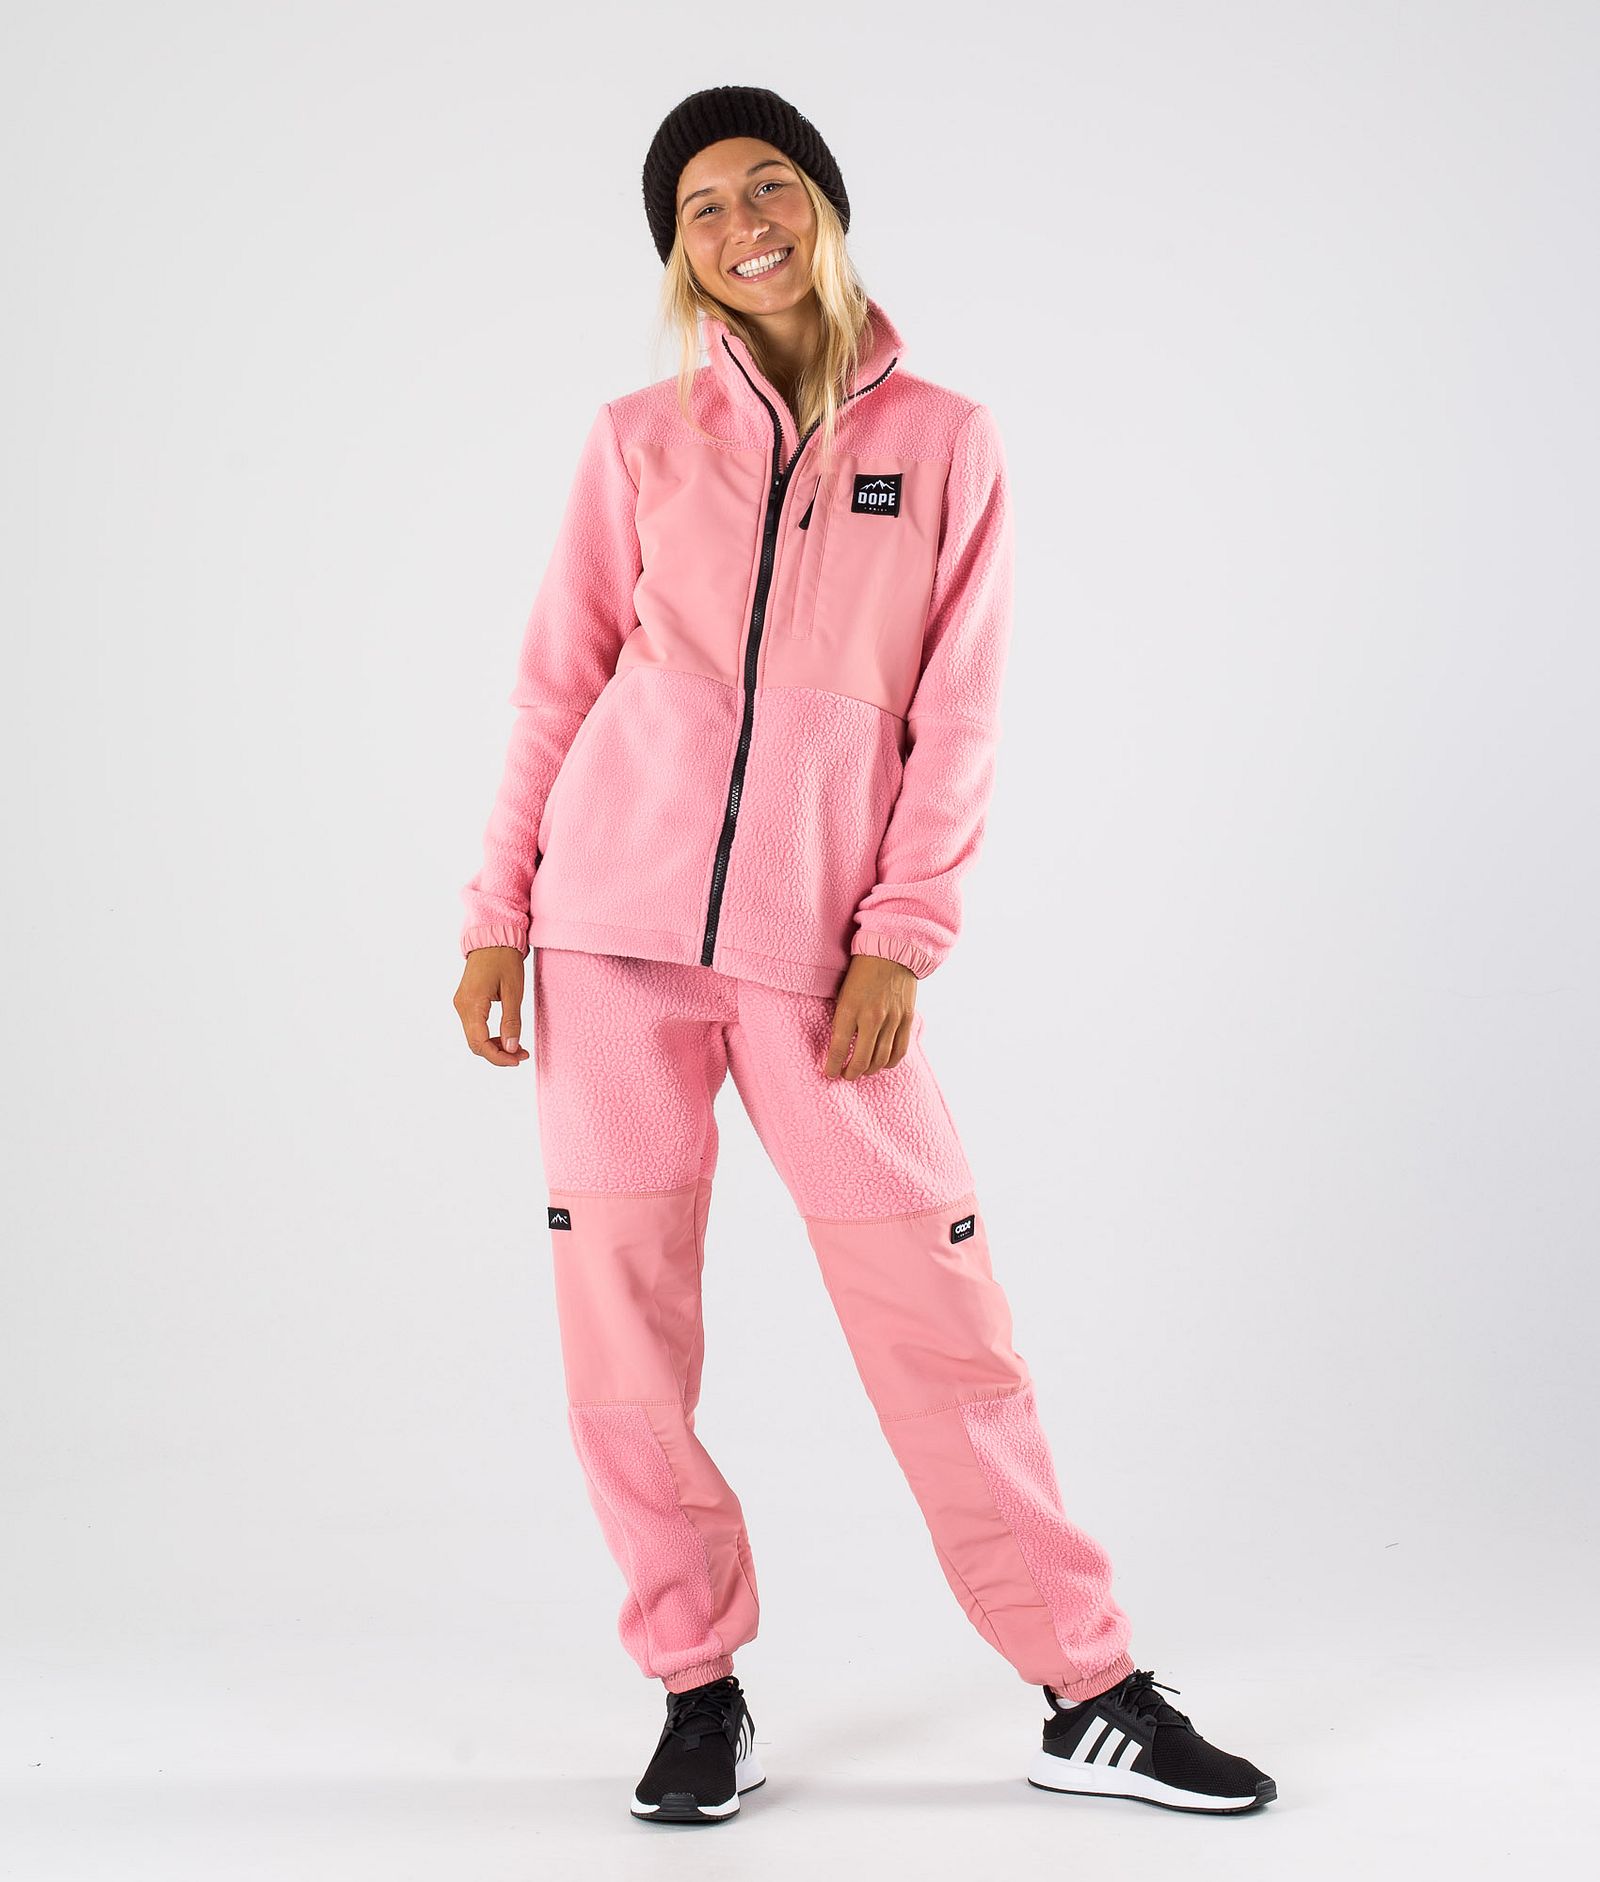 Dope Ollie W Polar con Capucha Mujer Pink